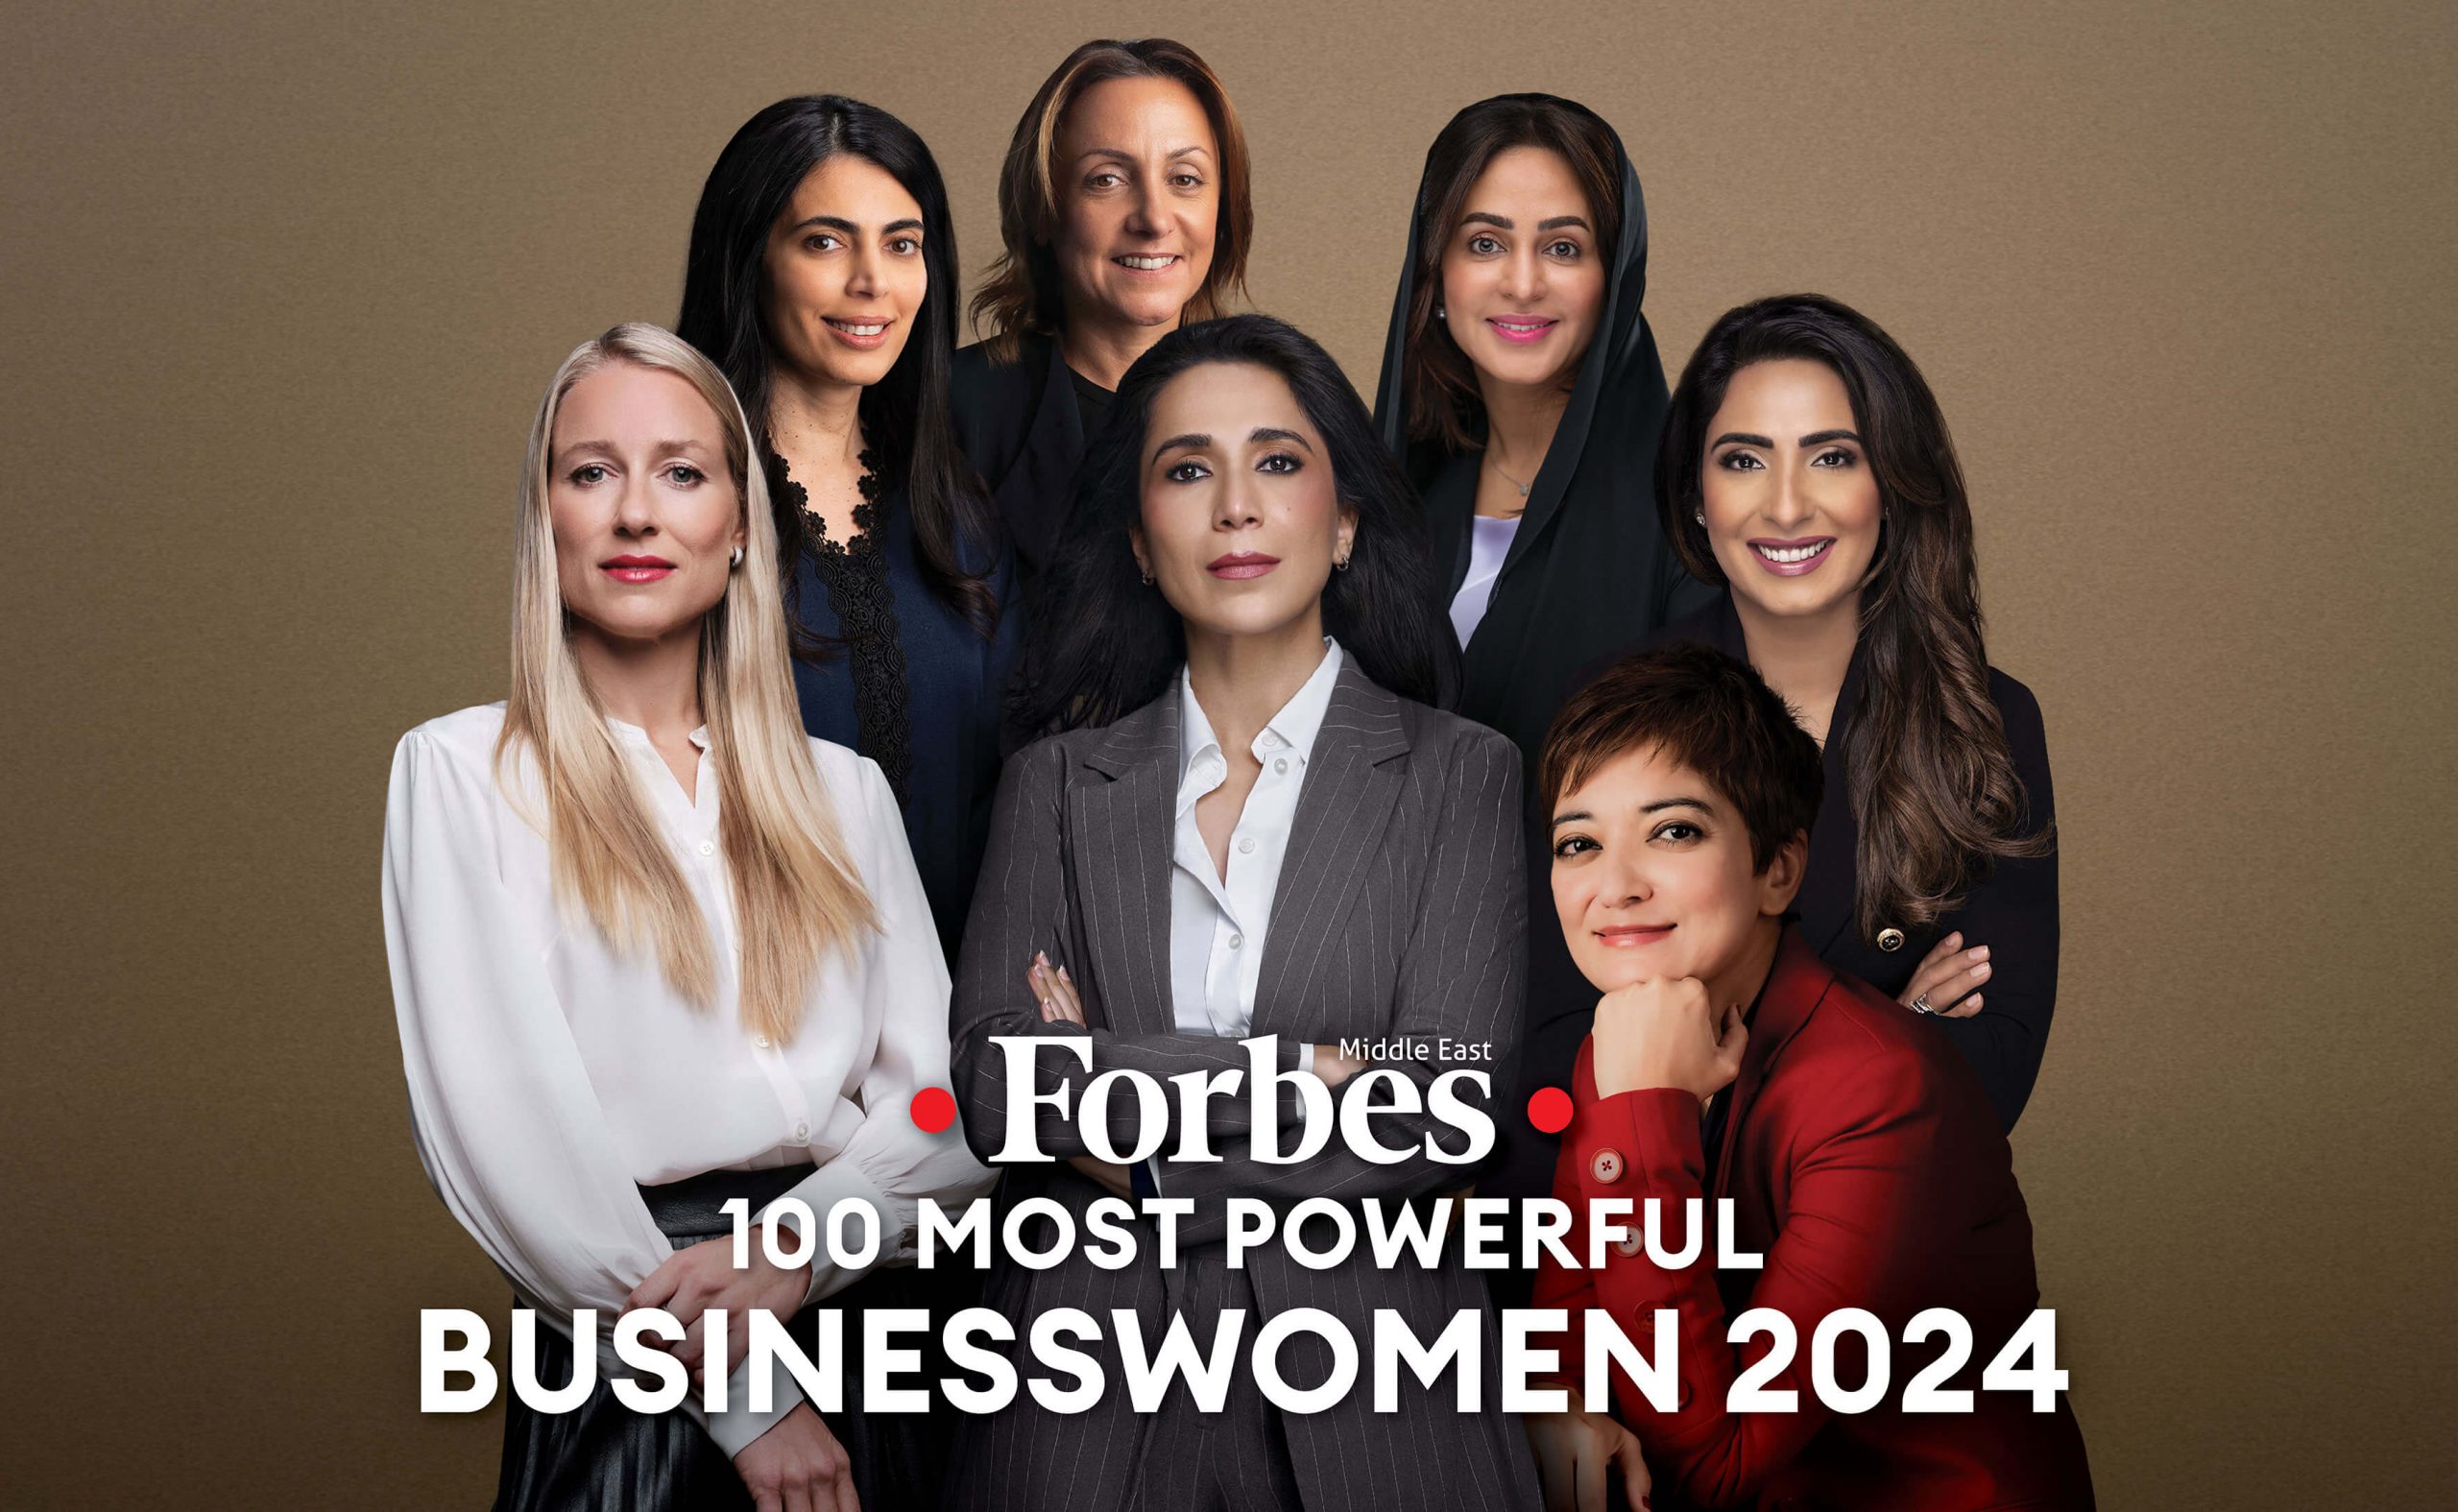 Six Qatar-based names among Forbes Middle East’s 100 Most Powerful Businesswomen 2024 list